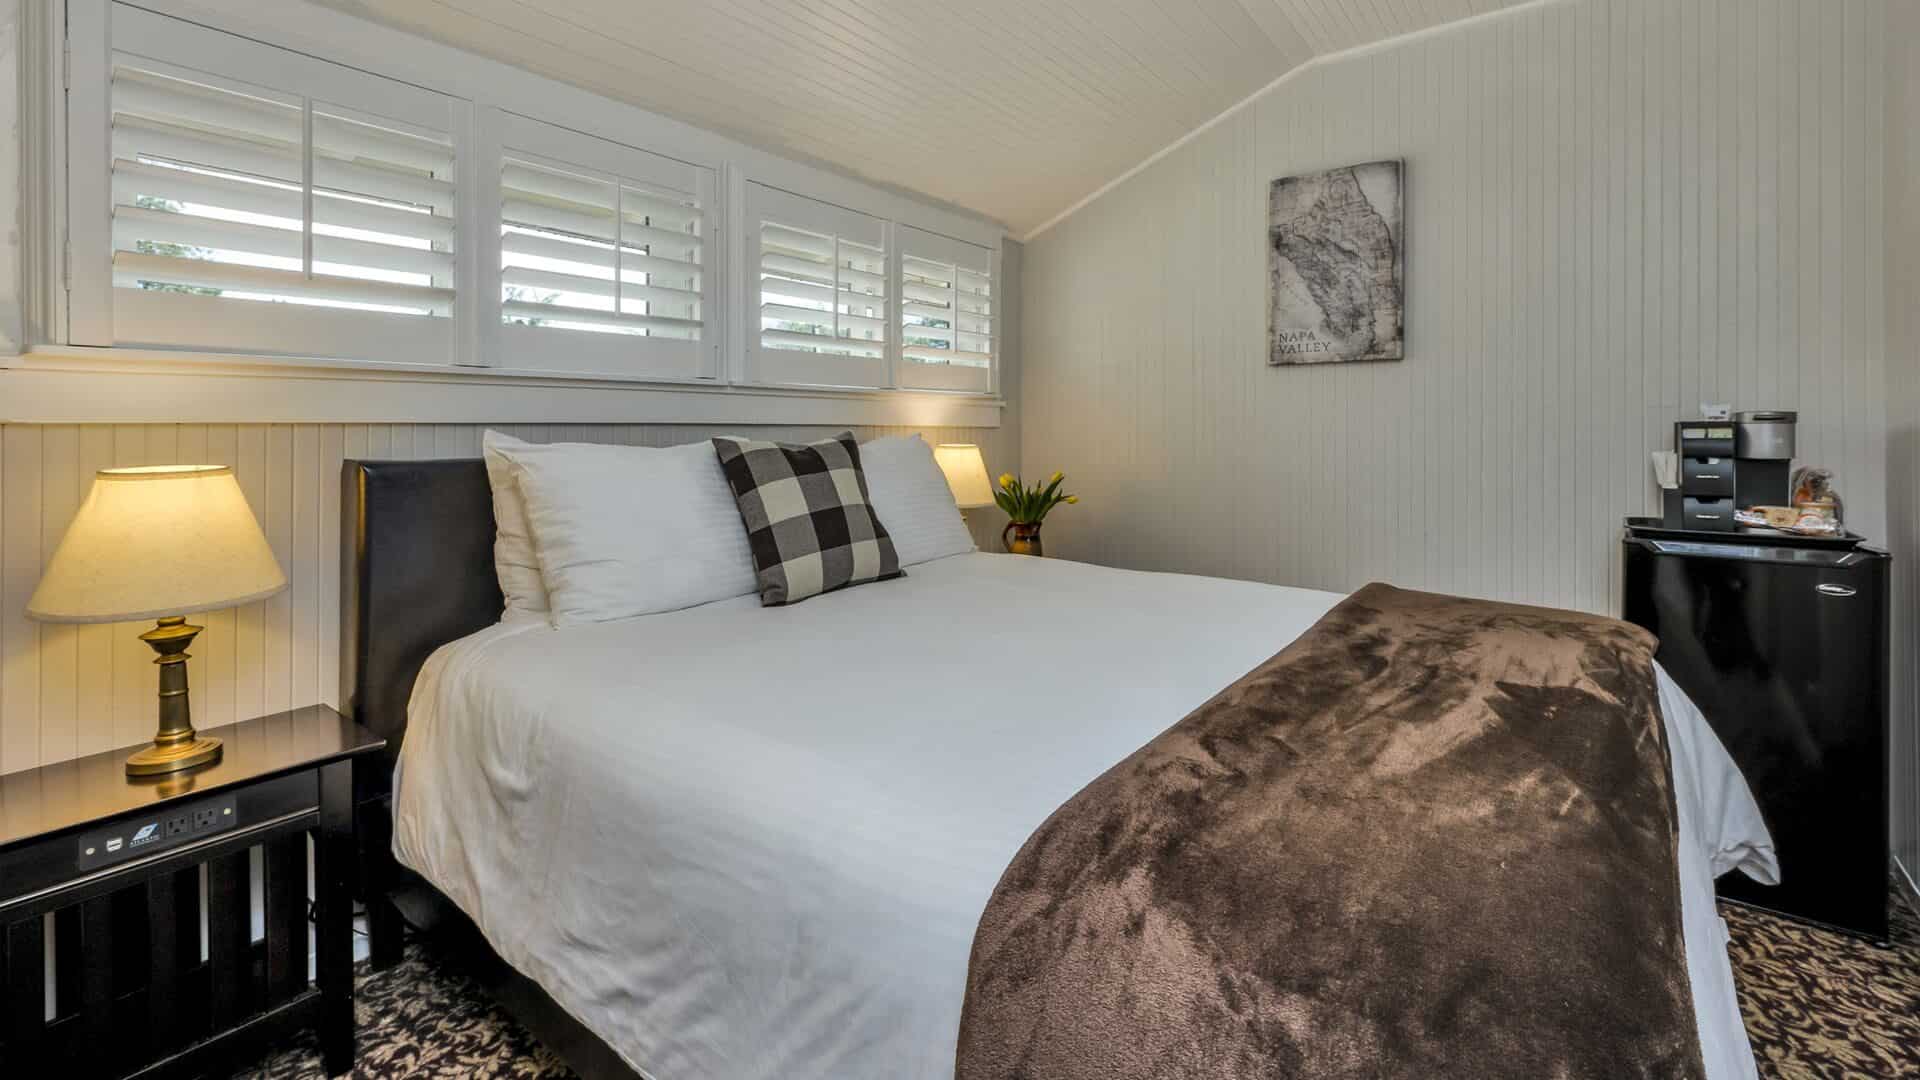 Bedroom with light gray walls, floral carpeting, white bedding, and black mini fridge